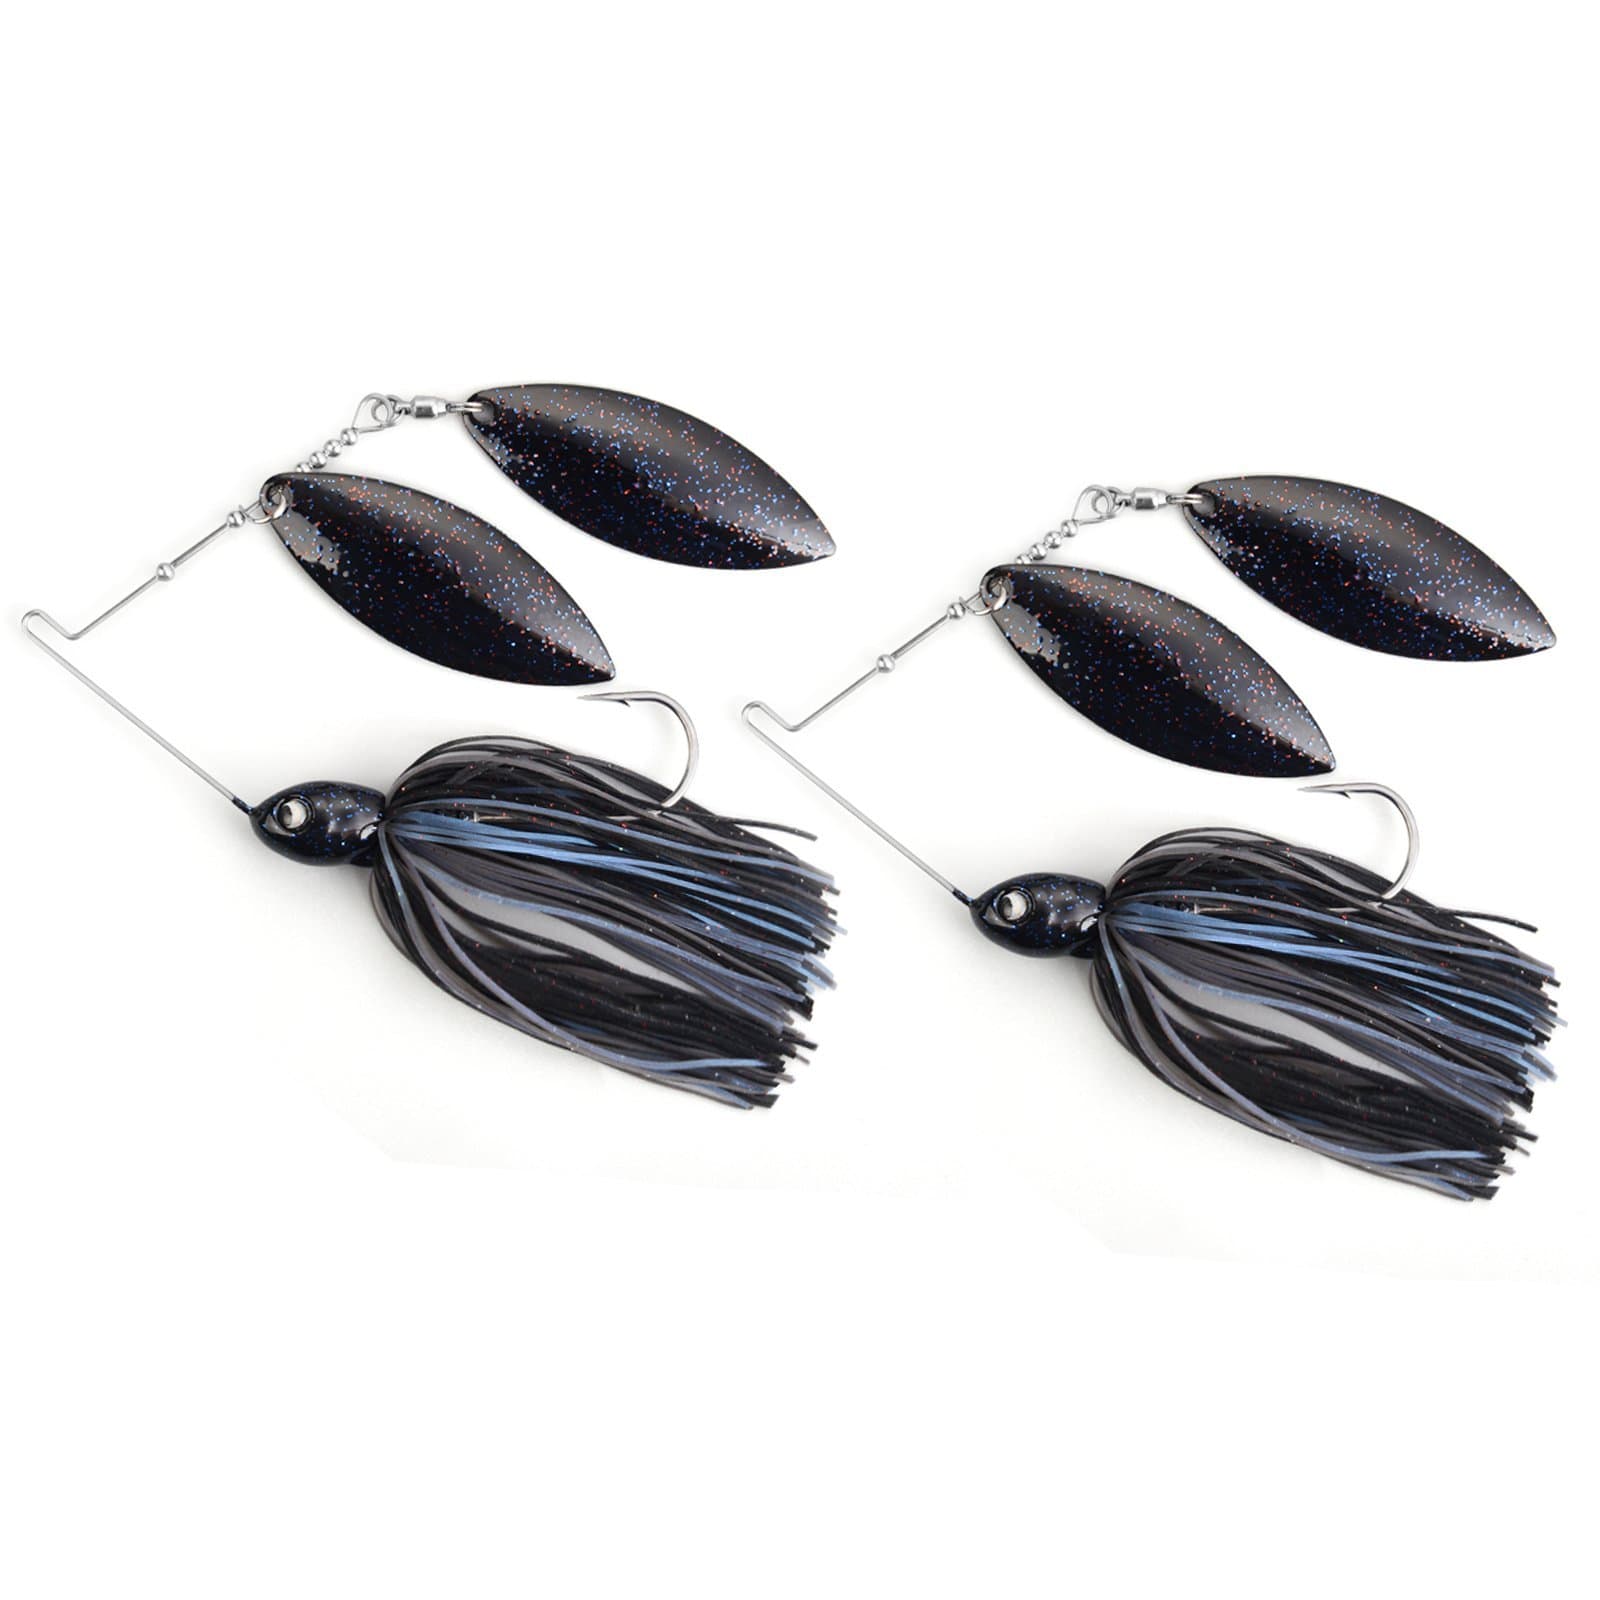 MadBite Bladed Jig Fishing Lures, 5 pc and 3 pc Multi-Color Kits